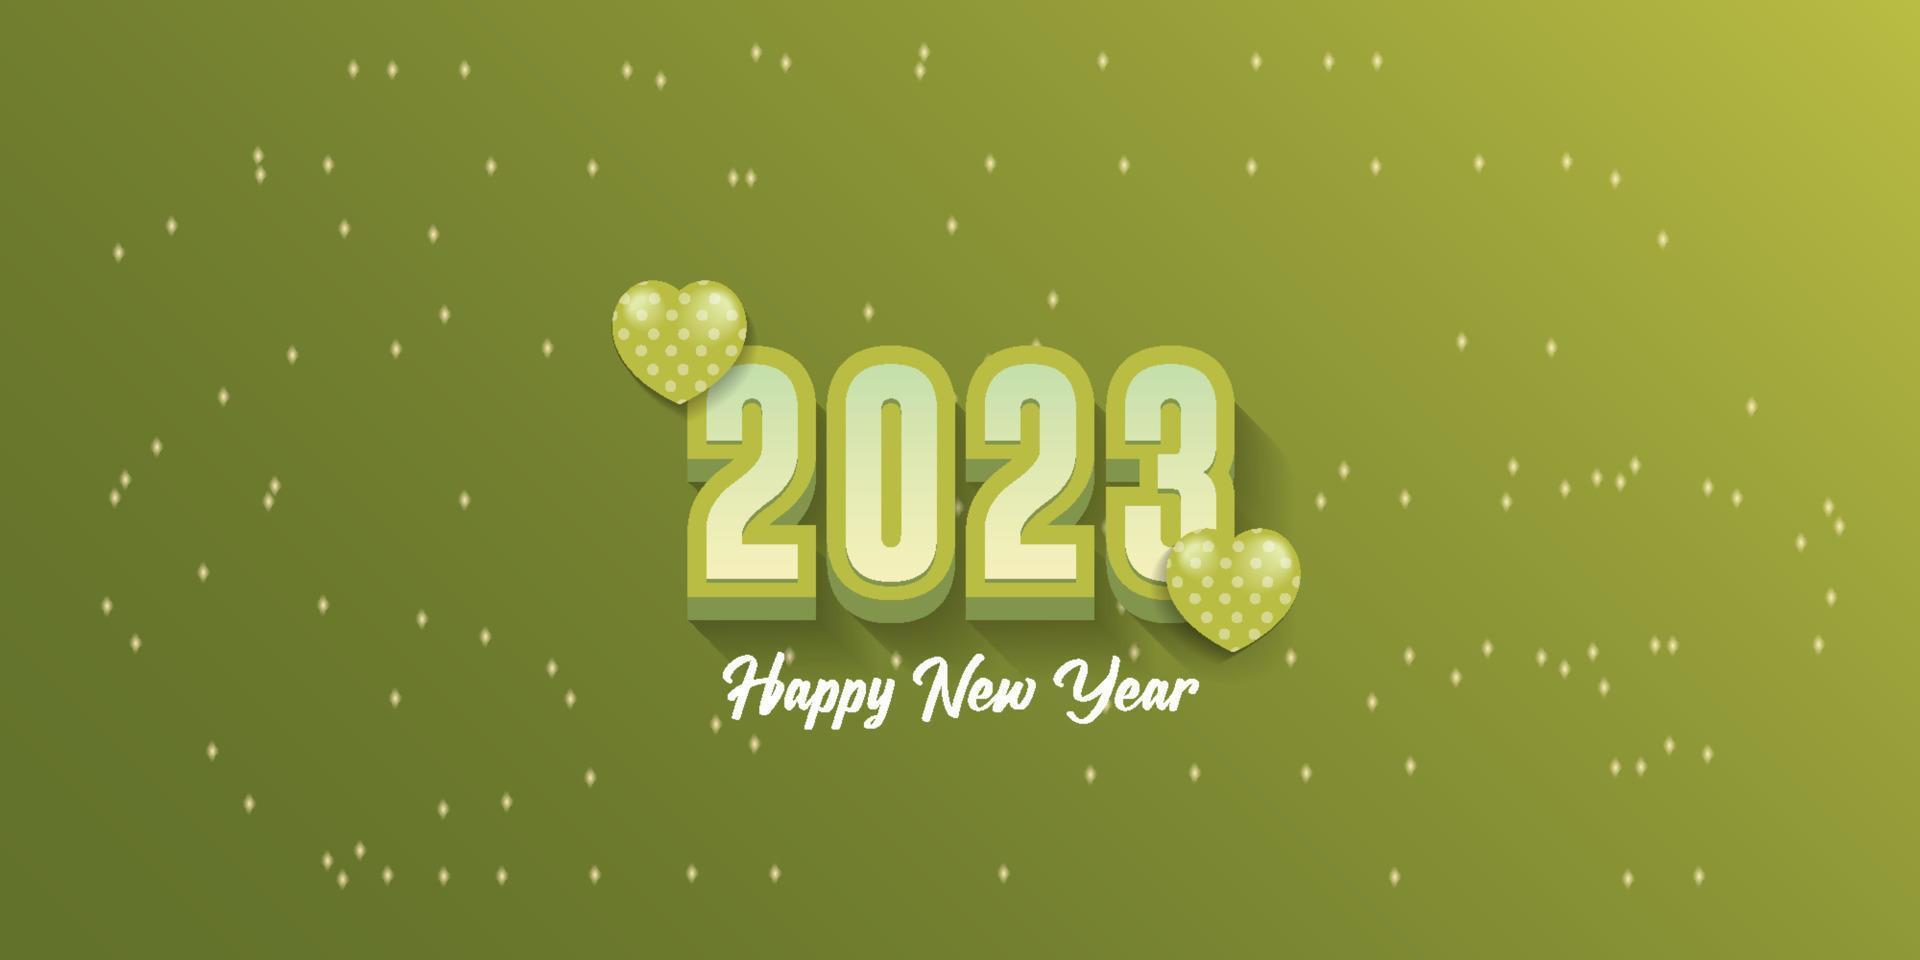 Happy new year 2023 green background vector illustration 3d numbers and hearts